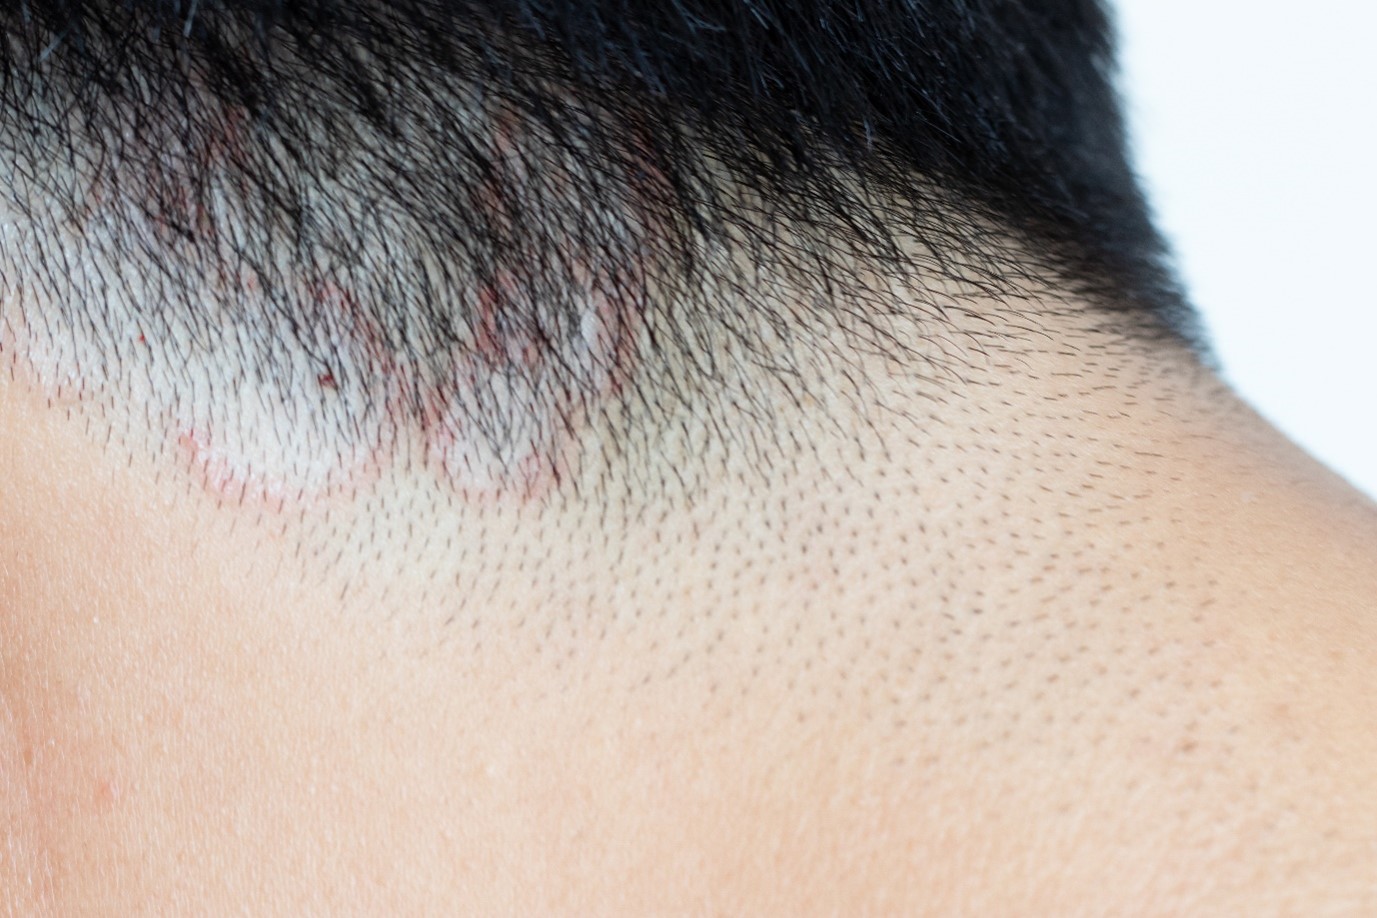 Man suffering from tinea versicolor